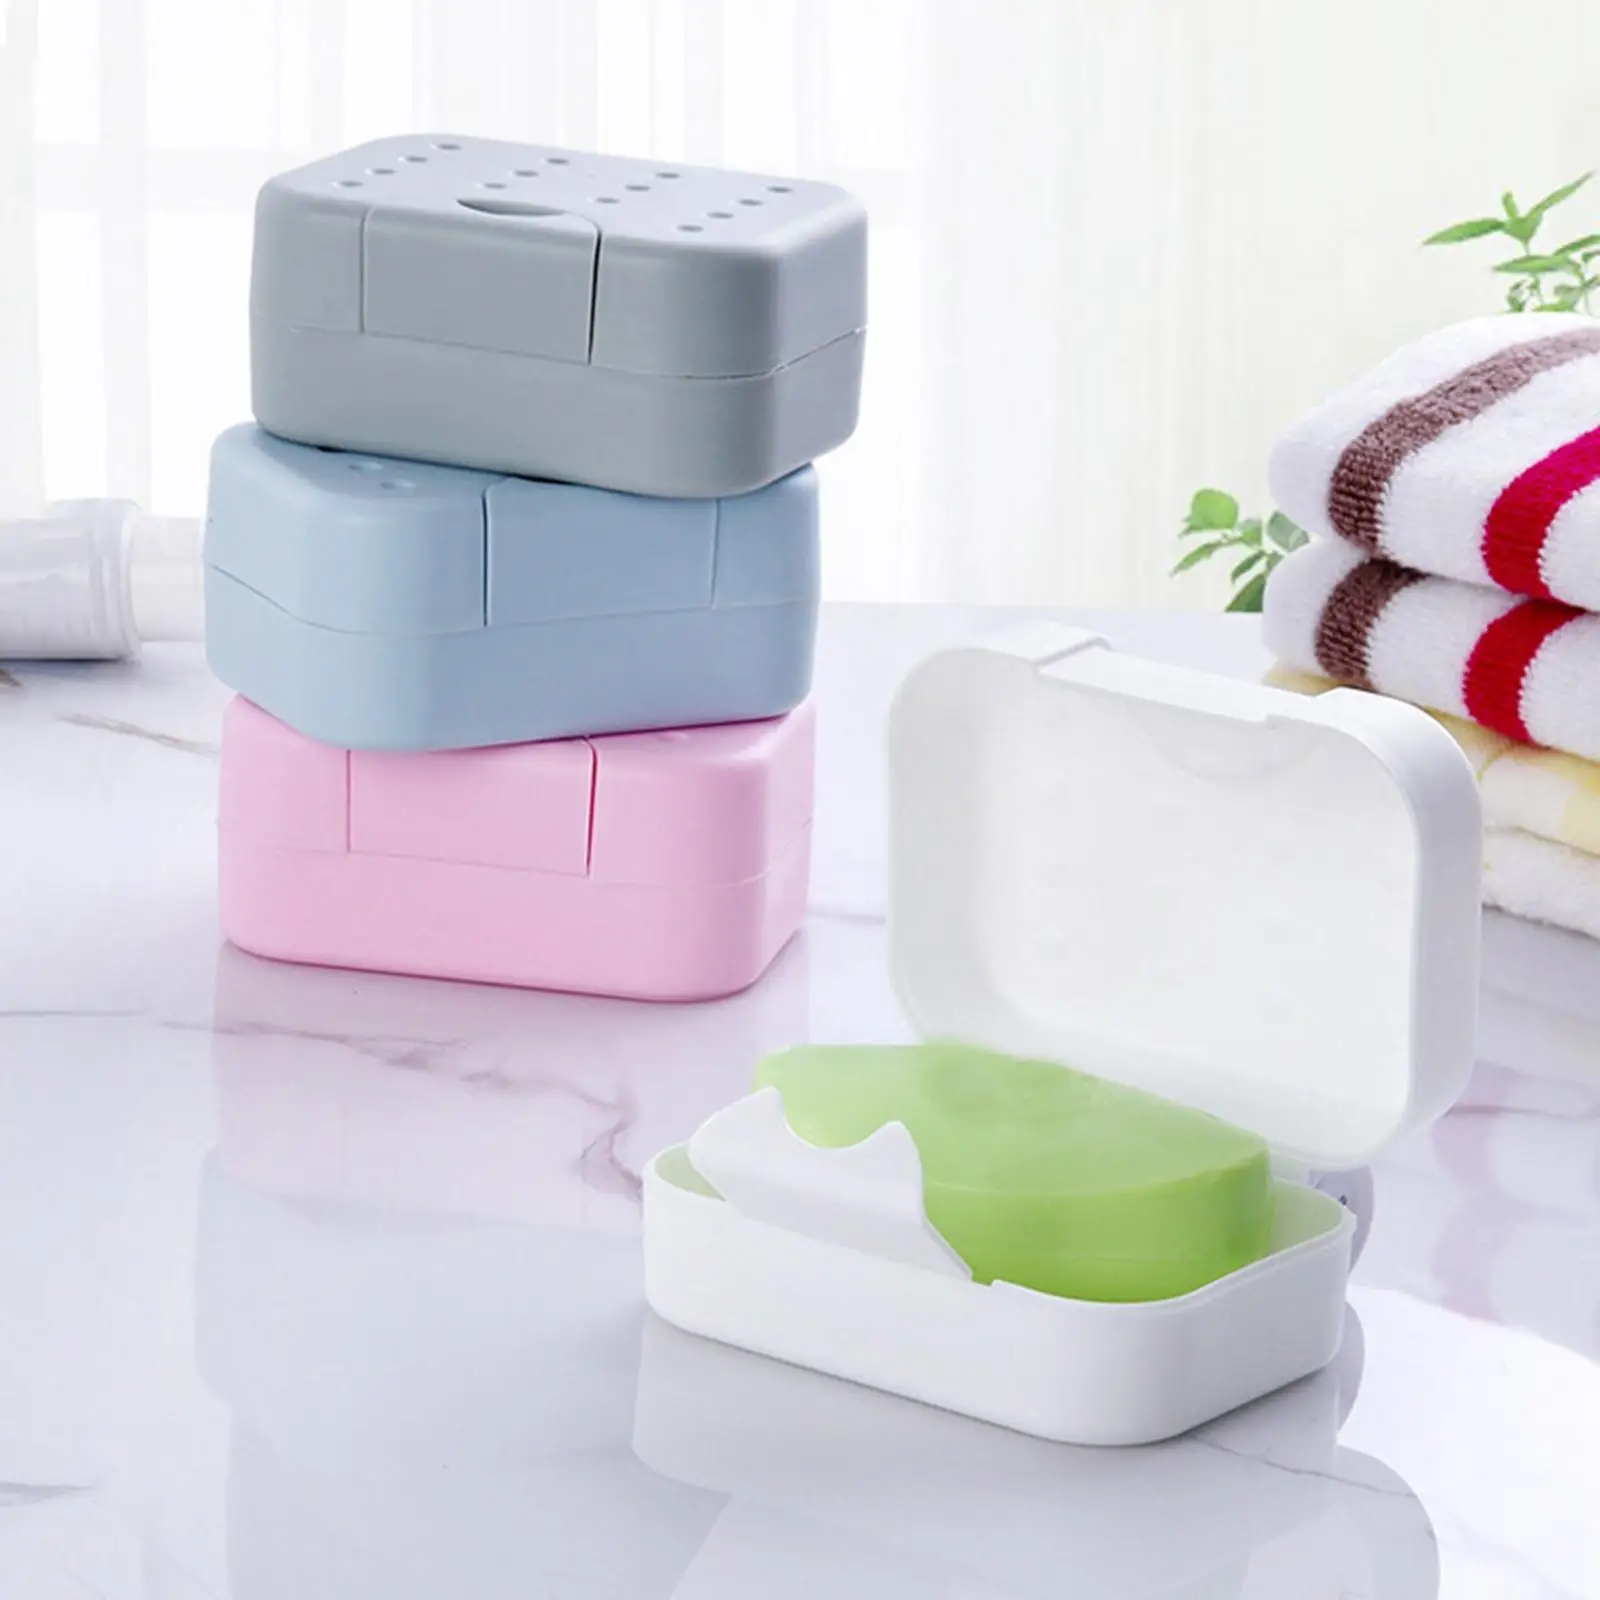 Portable Travel Soap Box Dish Case Container Soap Bar Holder for Gym School Strong Sealing with Lid Leakproof